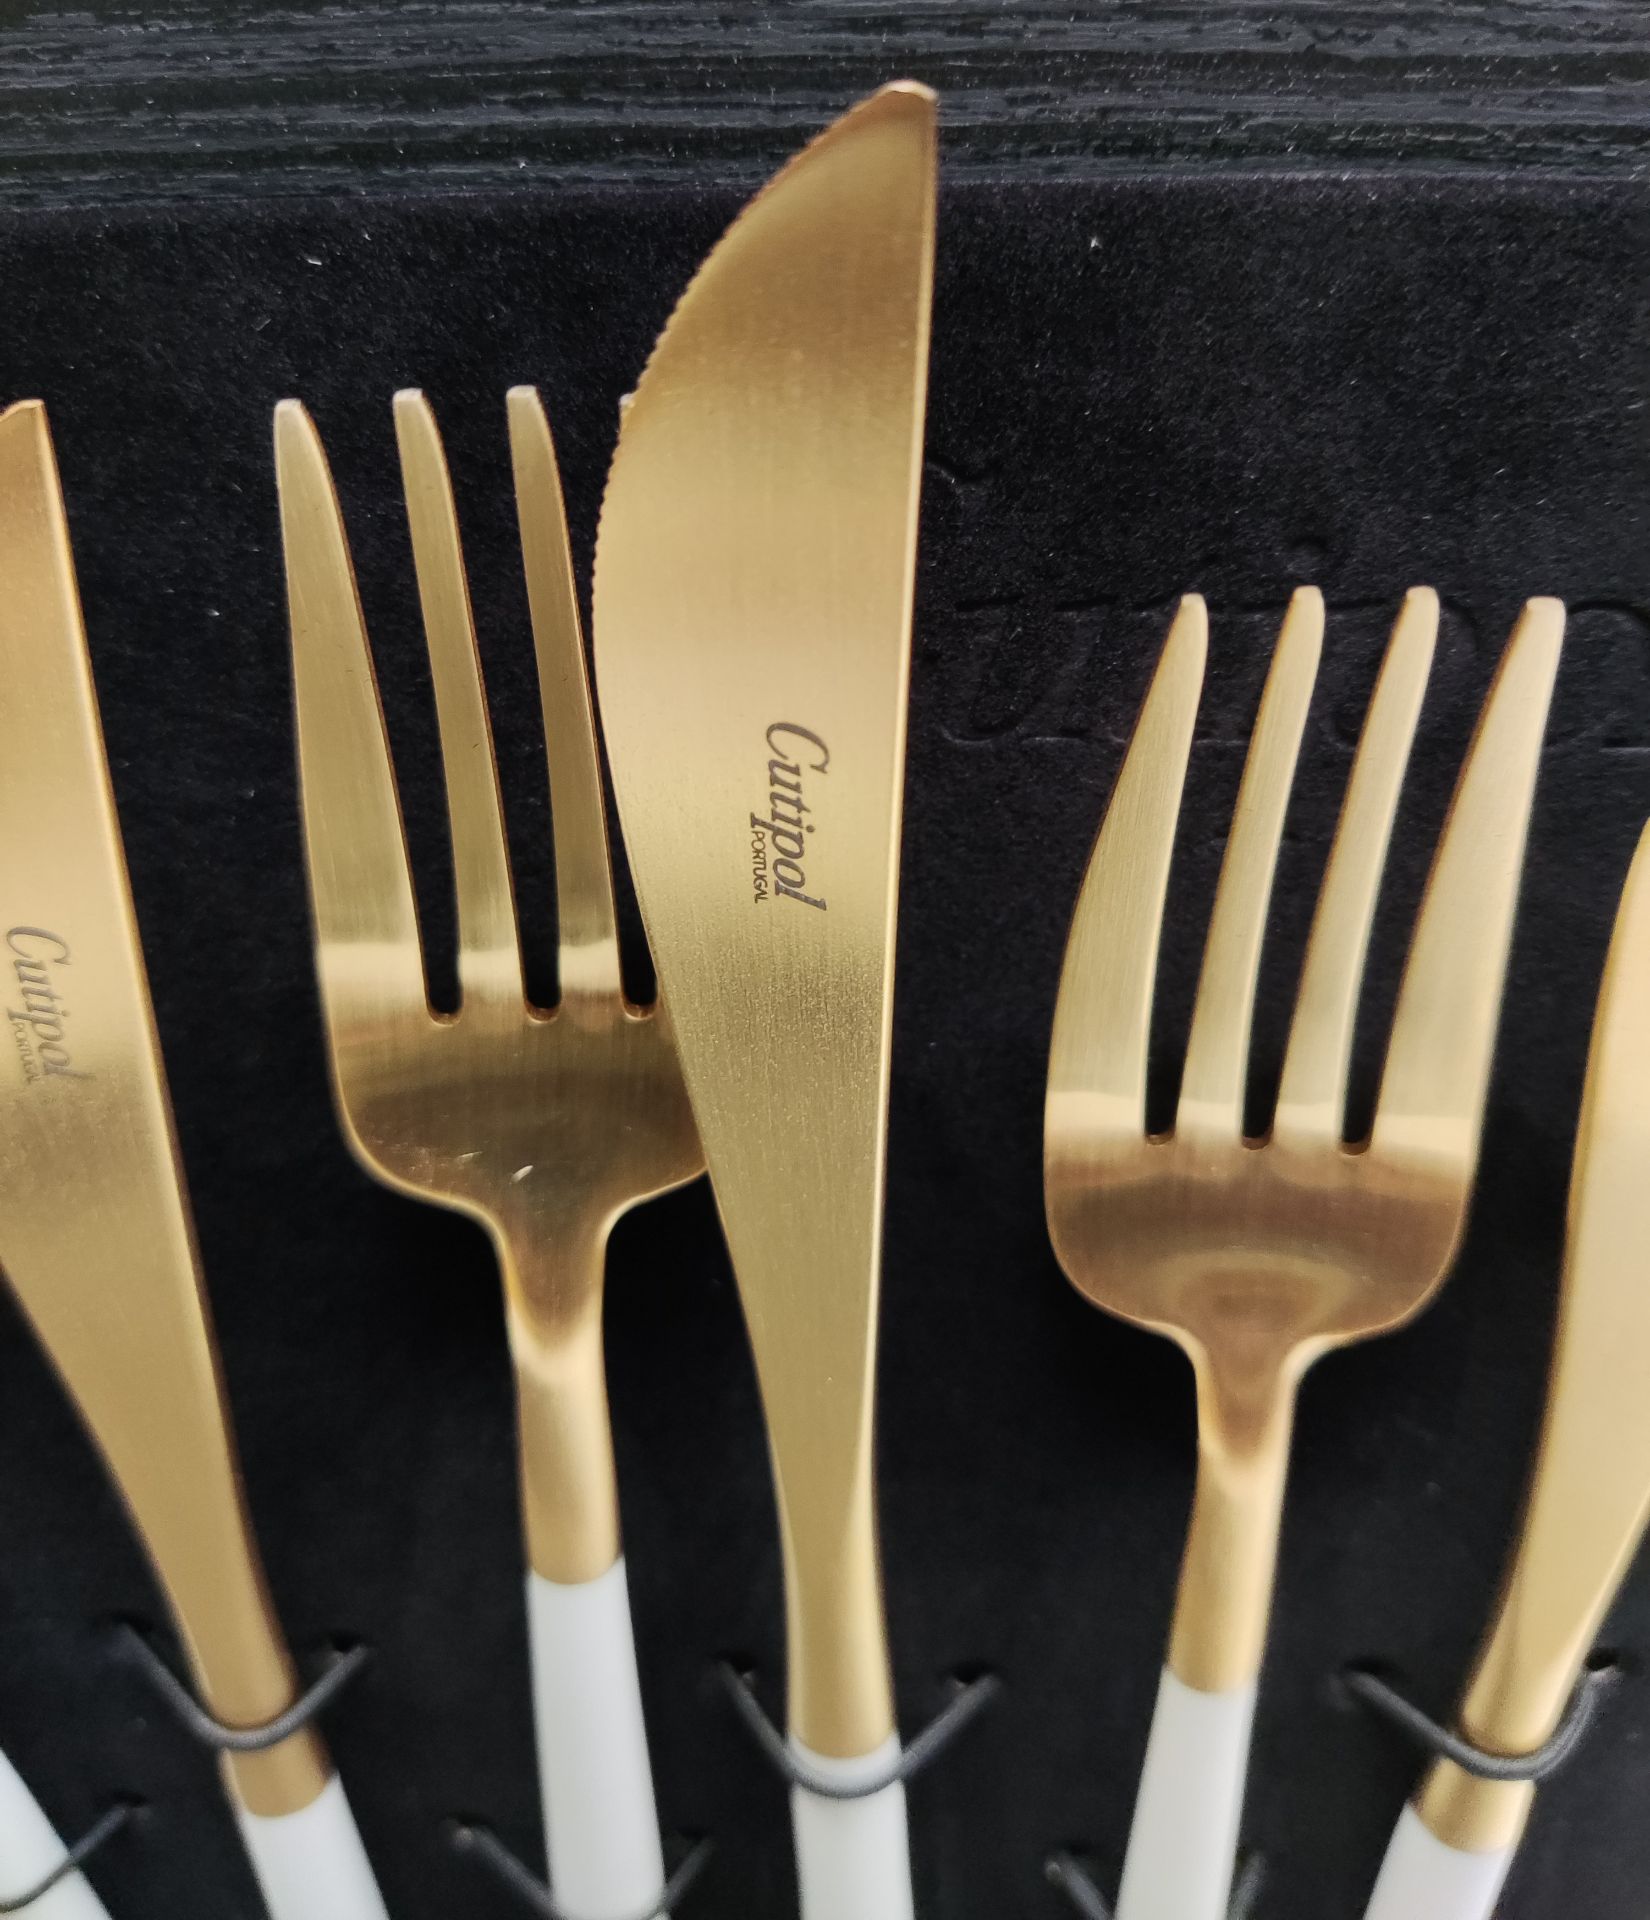 1 x CUTIPOL 'Goa' Luxury 24-Piece White/Gold Cutlery Set - New/Boxed - Original RRP £499.00 - Image 10 of 24